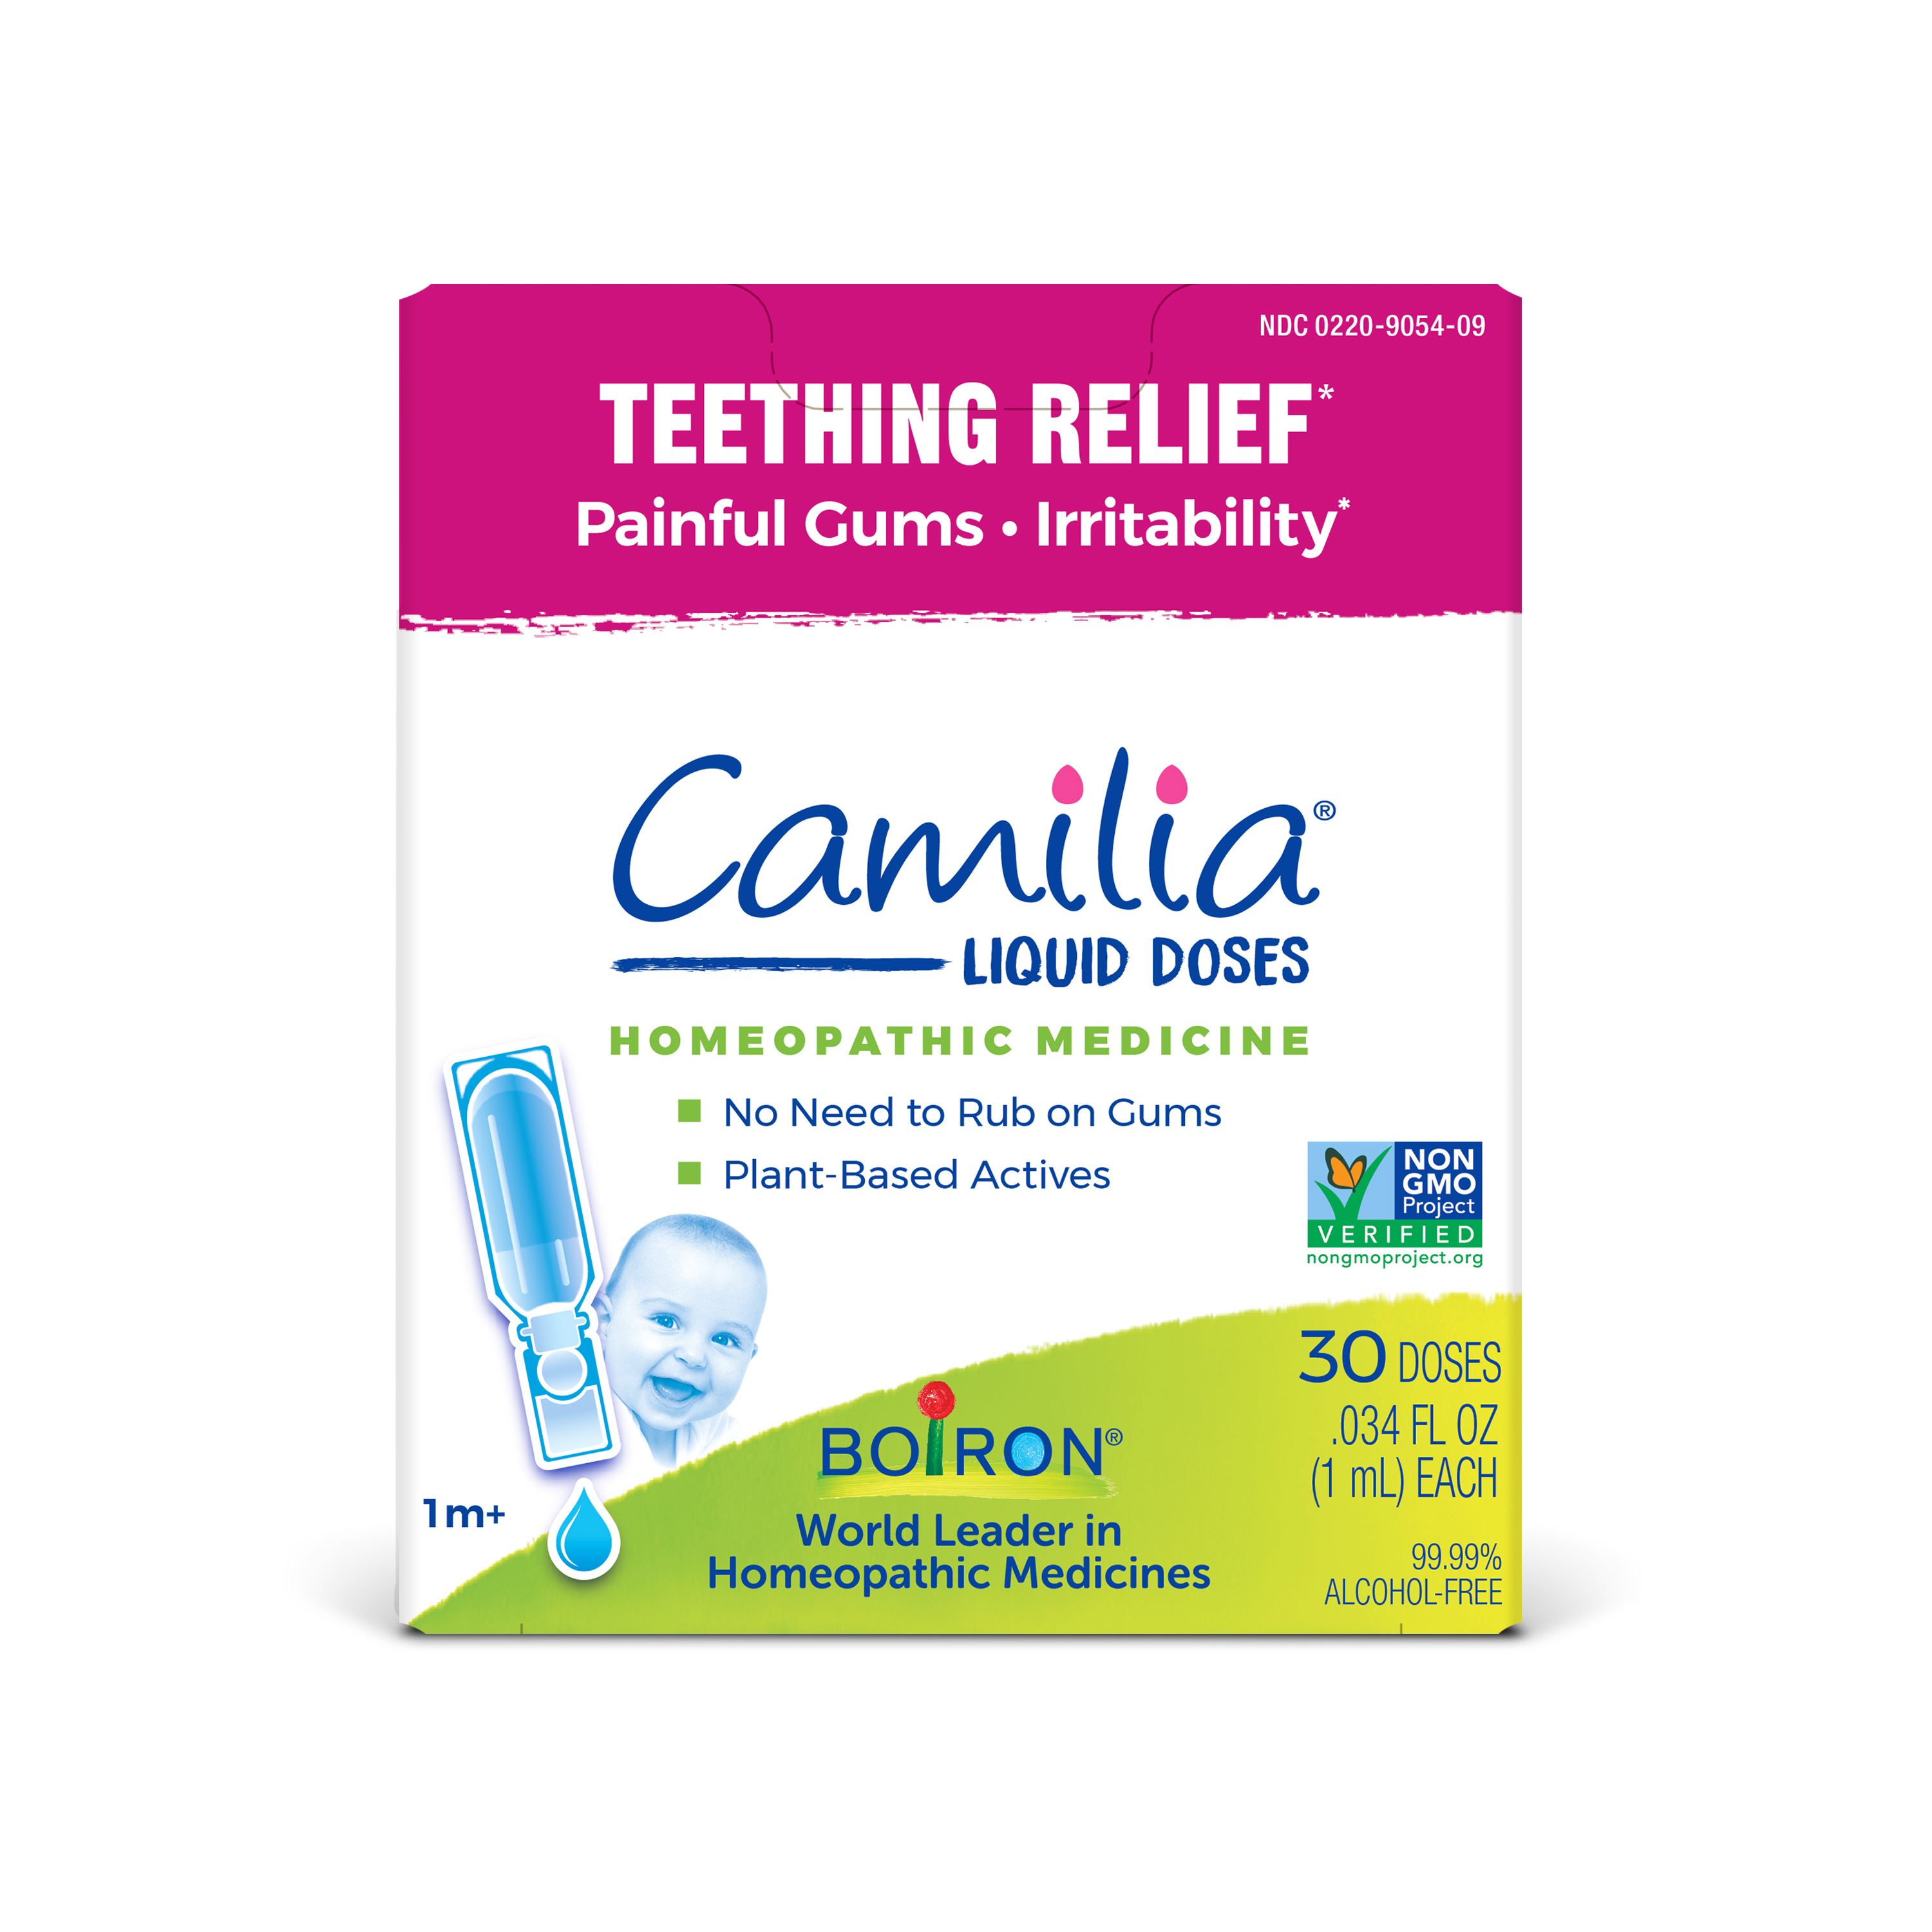 Boiron Camilia, Homeopathic Medicine for Teething Relief, 30 Single Liquid Doses - image 1 of 10